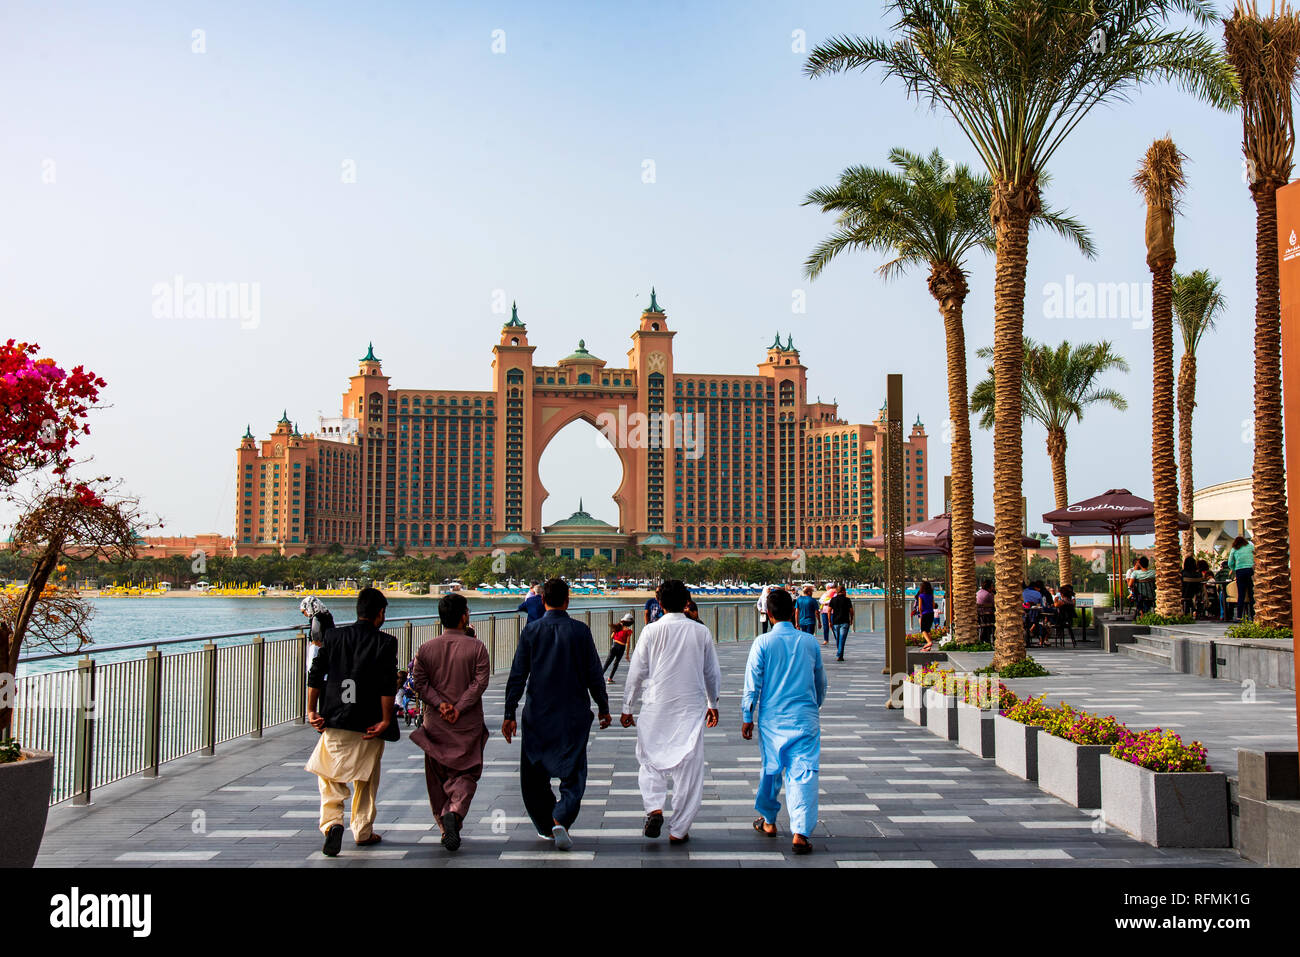 Dubai, United Arab Emirates - January 25, 2019: Pakistani tourists visiting The Pointe waterfront dining and entertainment destination newly opened at Stock Photo